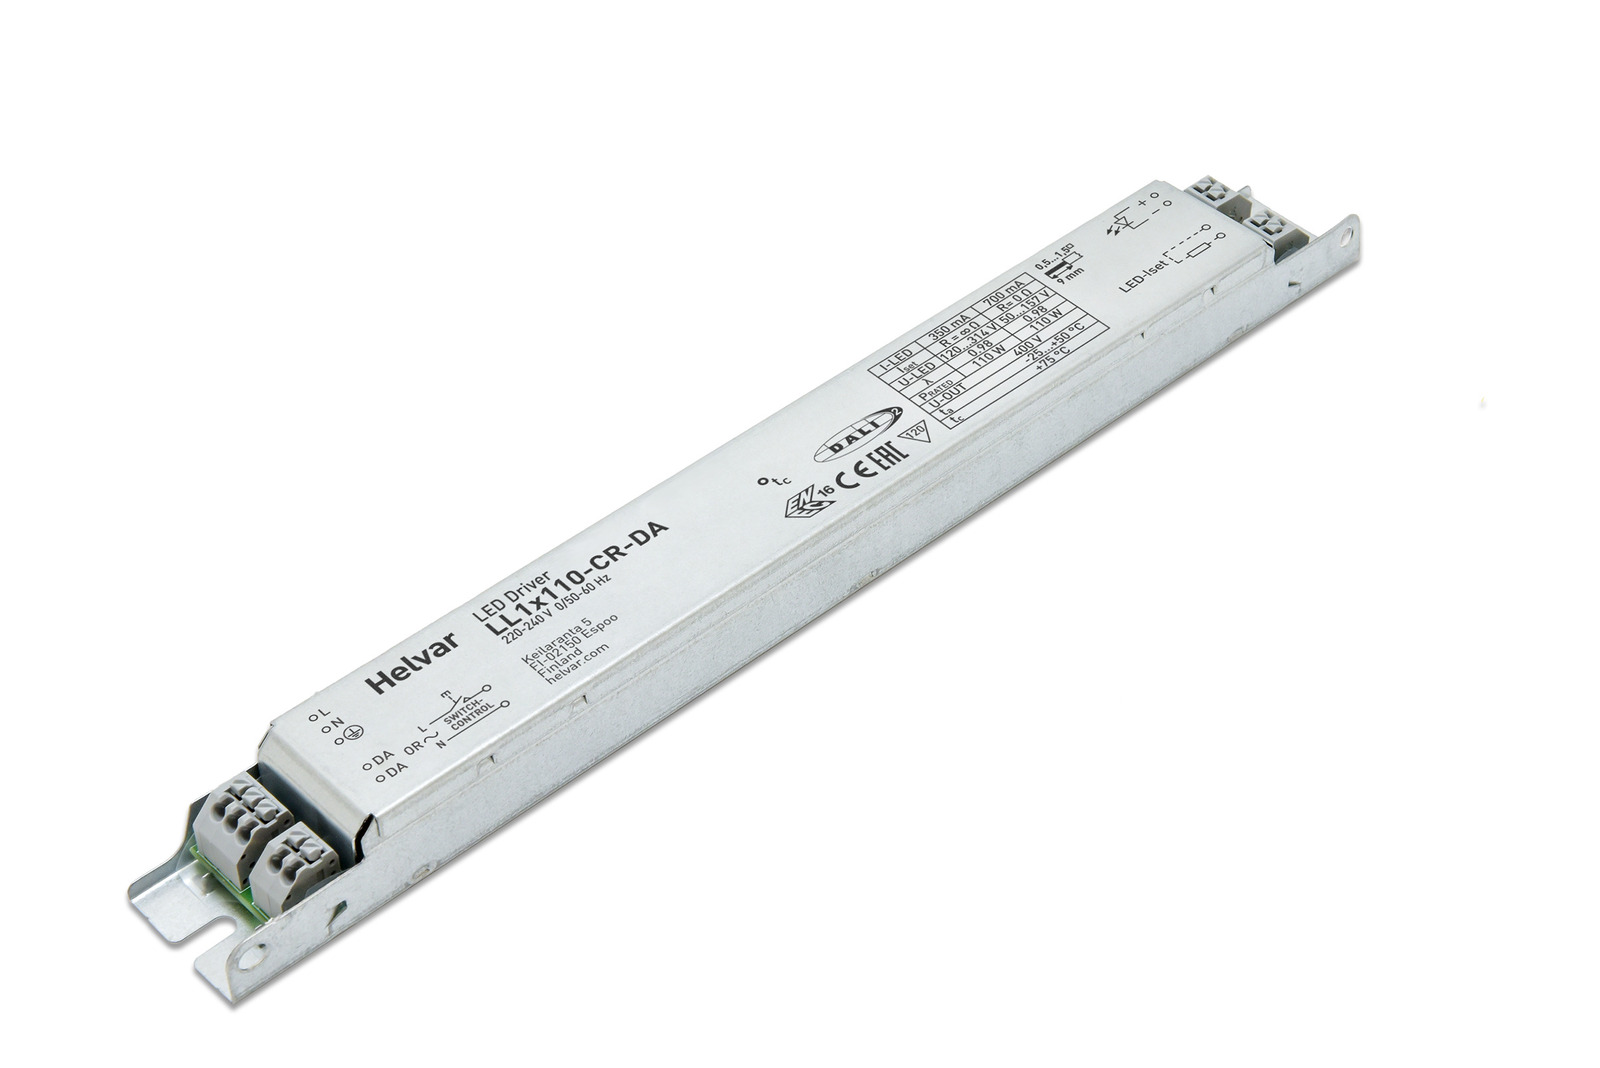 LC1x30-SR Click-on strain relief for LED drivers • Helvar